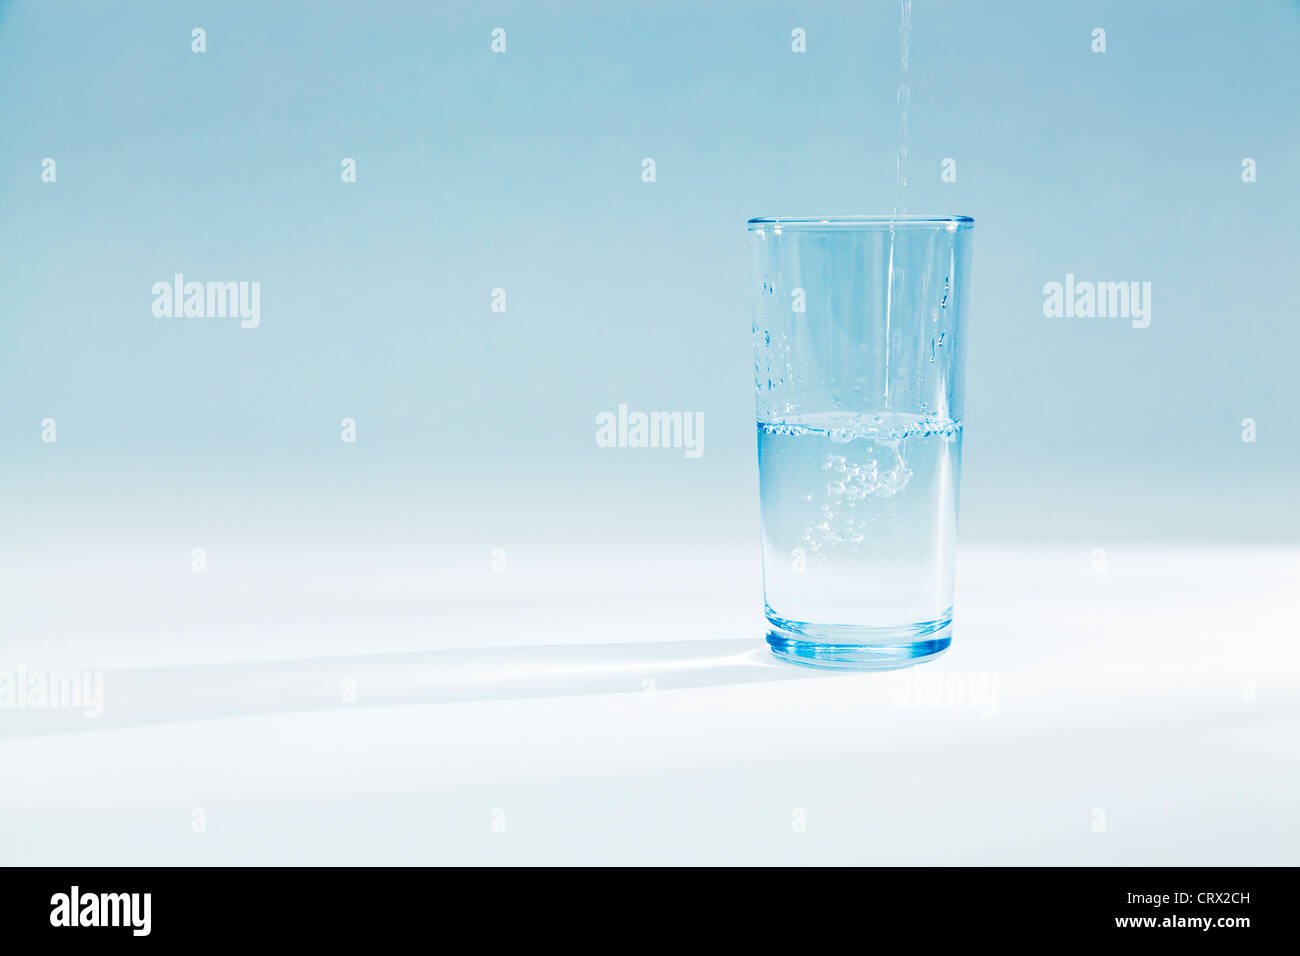 Water pouring into a half full glass tumbler in a blue light Stock Photo